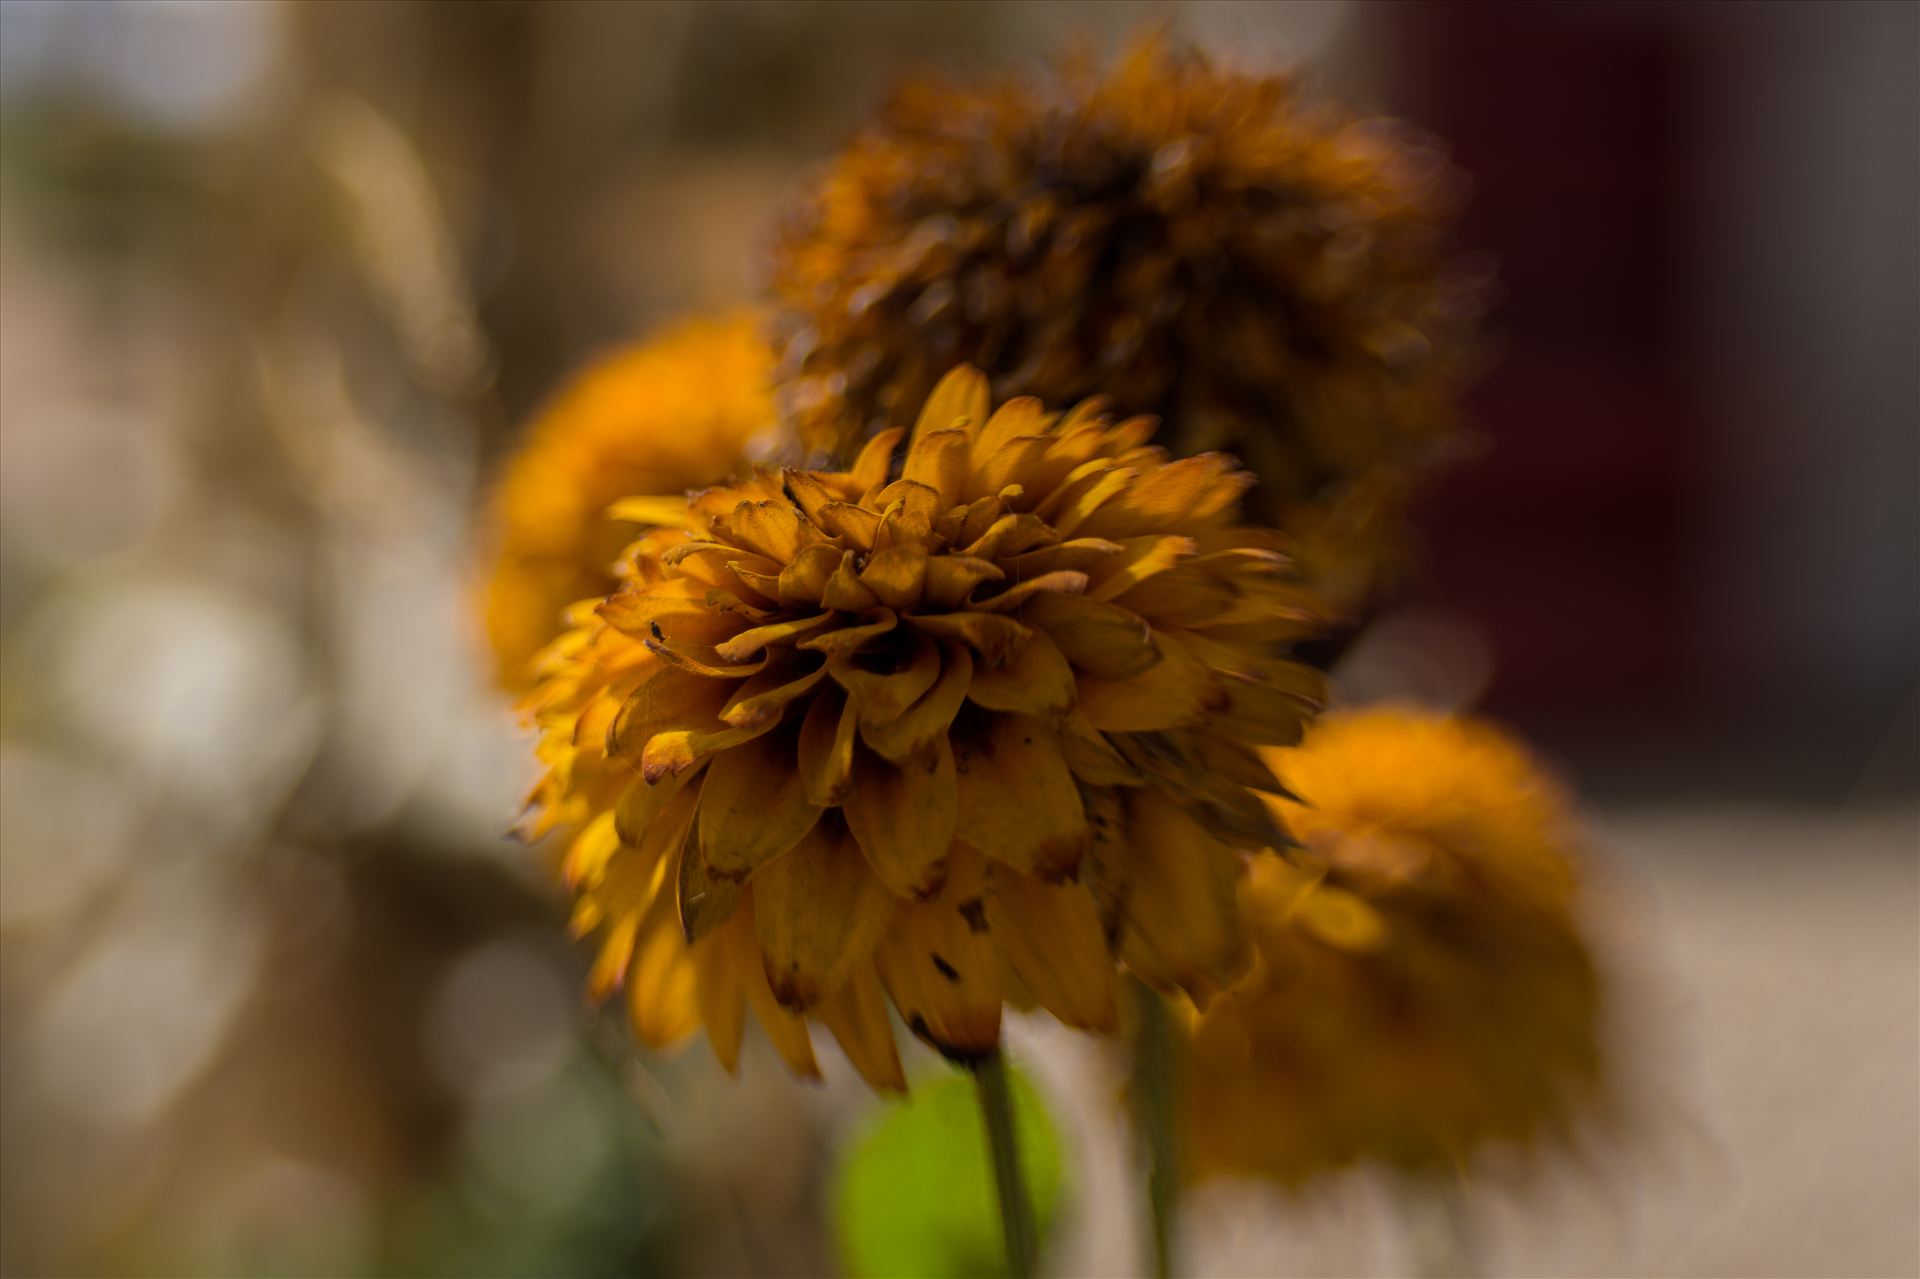 Fall Flower Puff 092715.jpg Warm Fall Flowers at the Pumpkin Patch by Sarah Williams